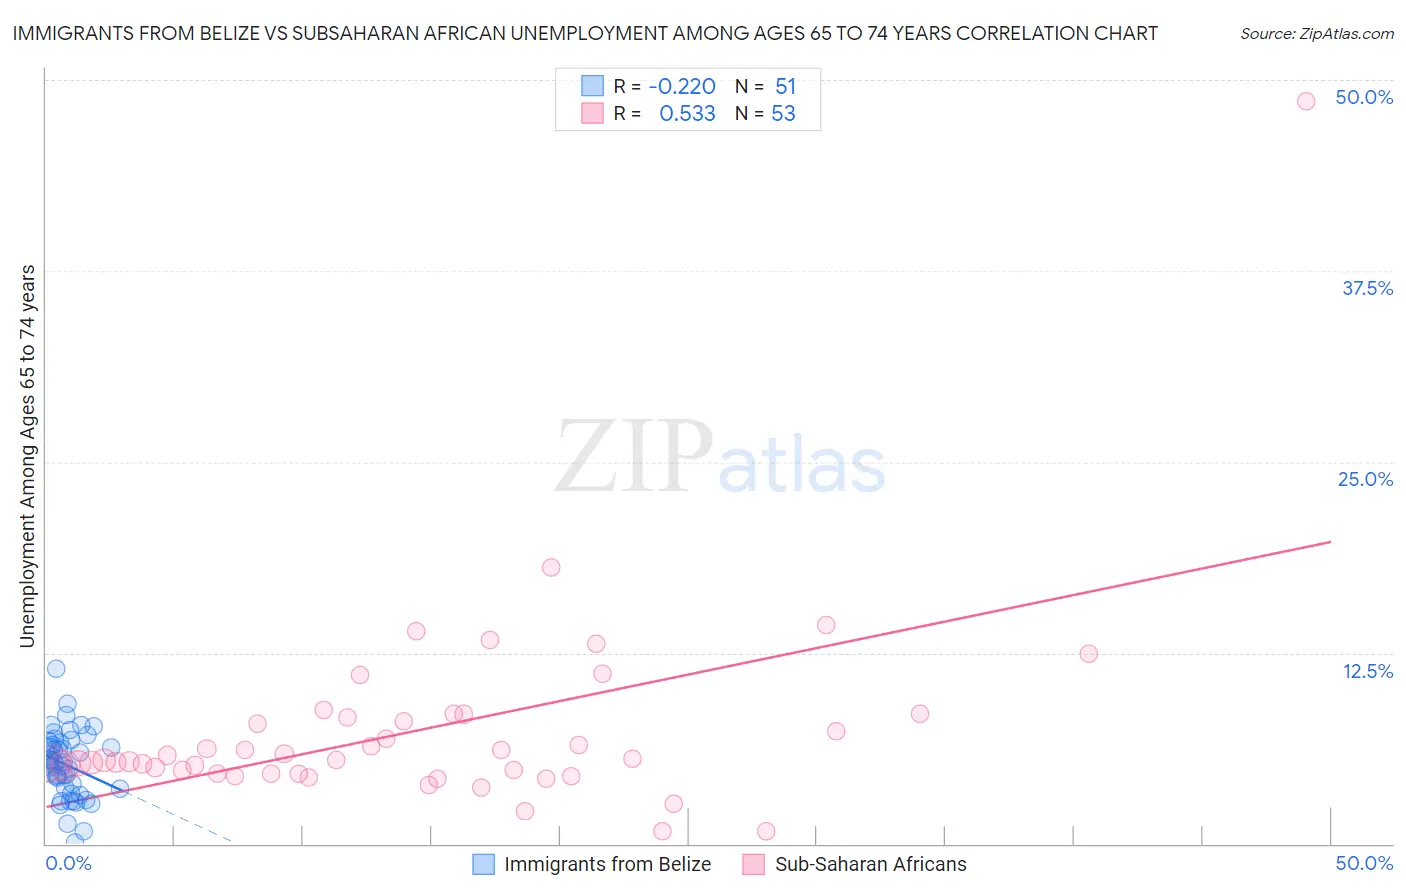 Immigrants from Belize vs Subsaharan African Unemployment Among Ages 65 to 74 years